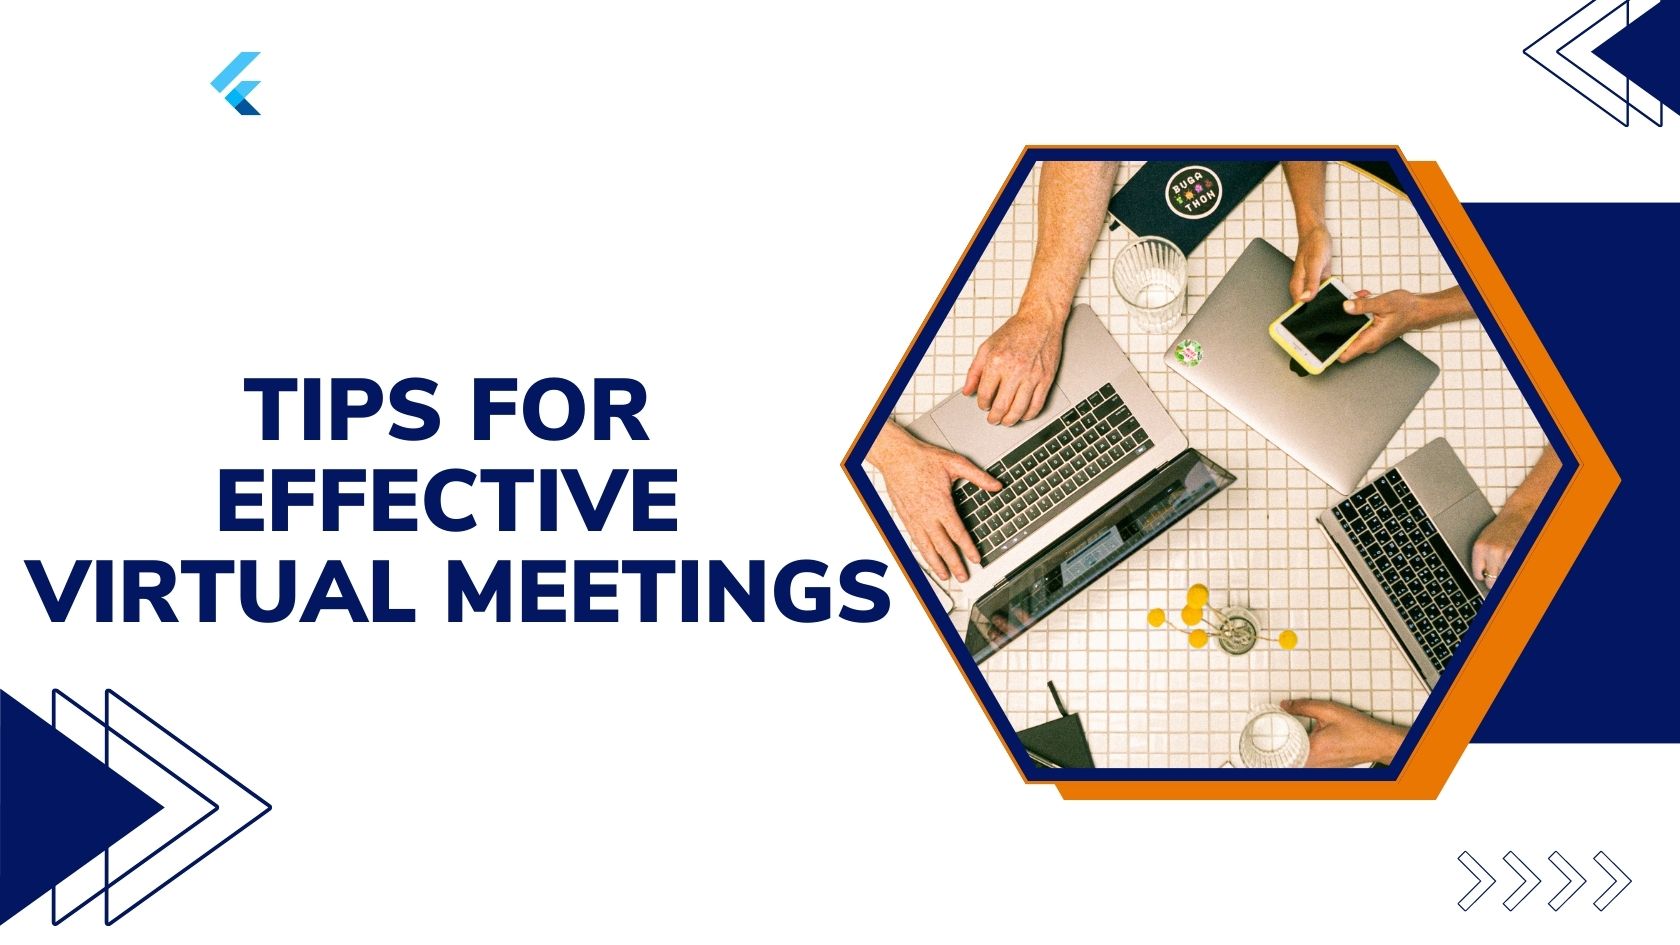 7 Tips for Making the Most Out of Your Virtual Meetings